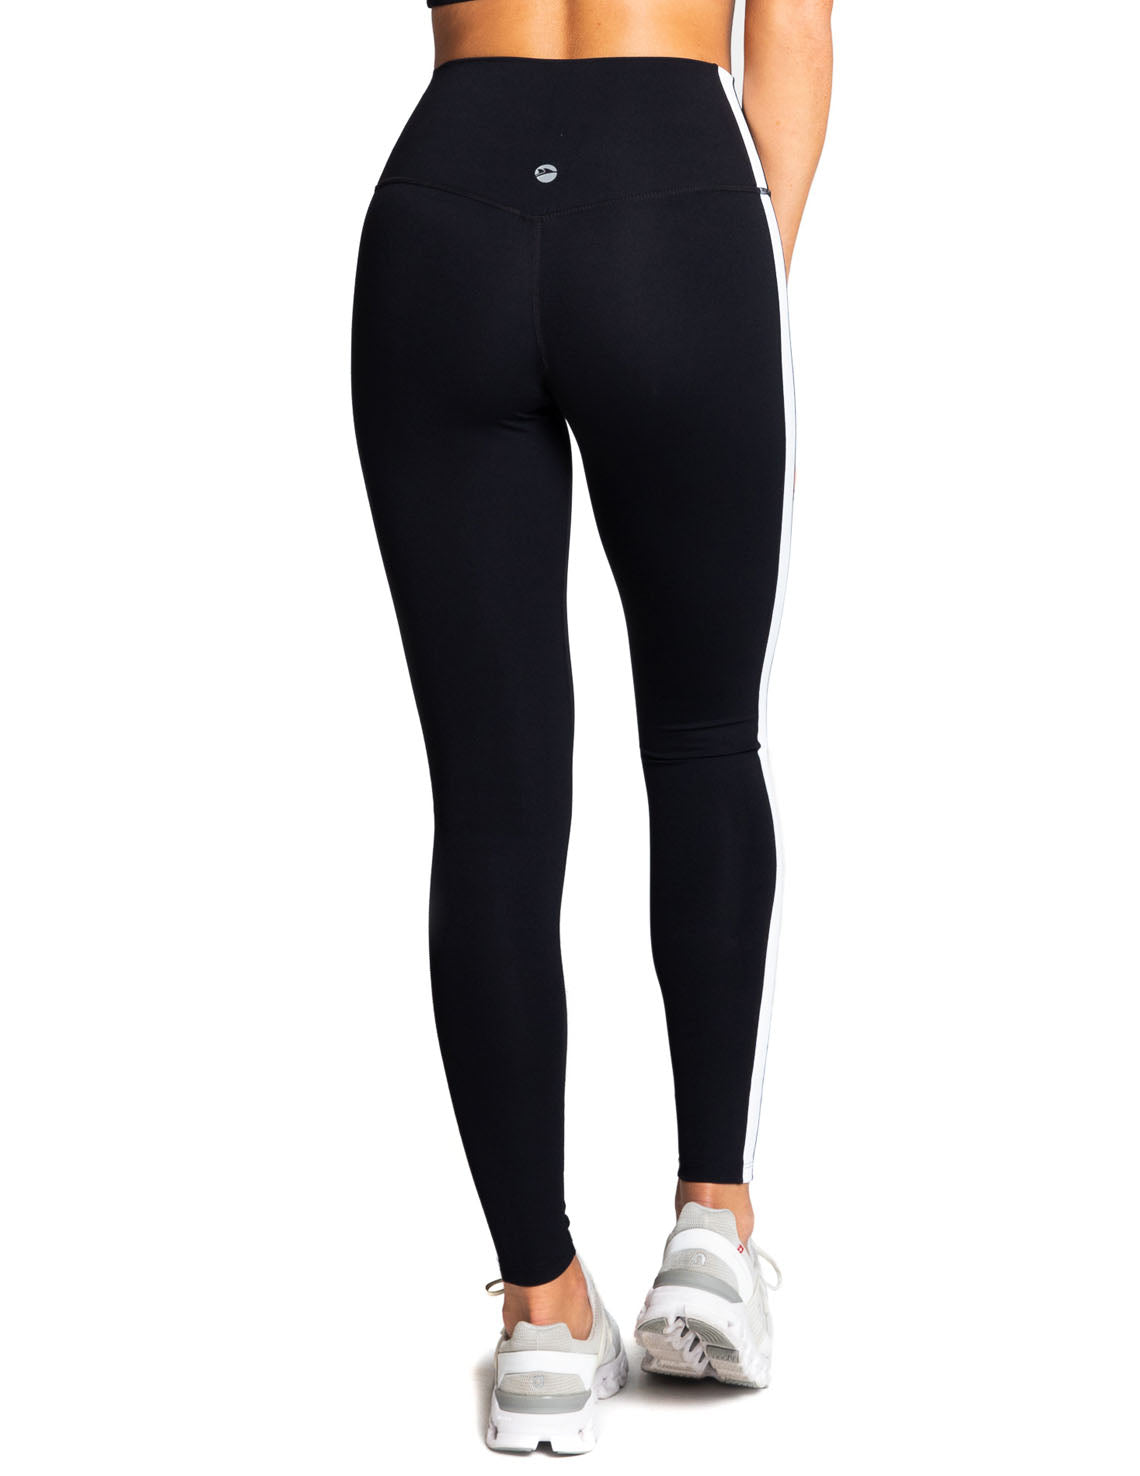 High Waisted Leggings With Heel Hole/ High Waist Black Leggings. Express  Shipping With DHL -  Israel